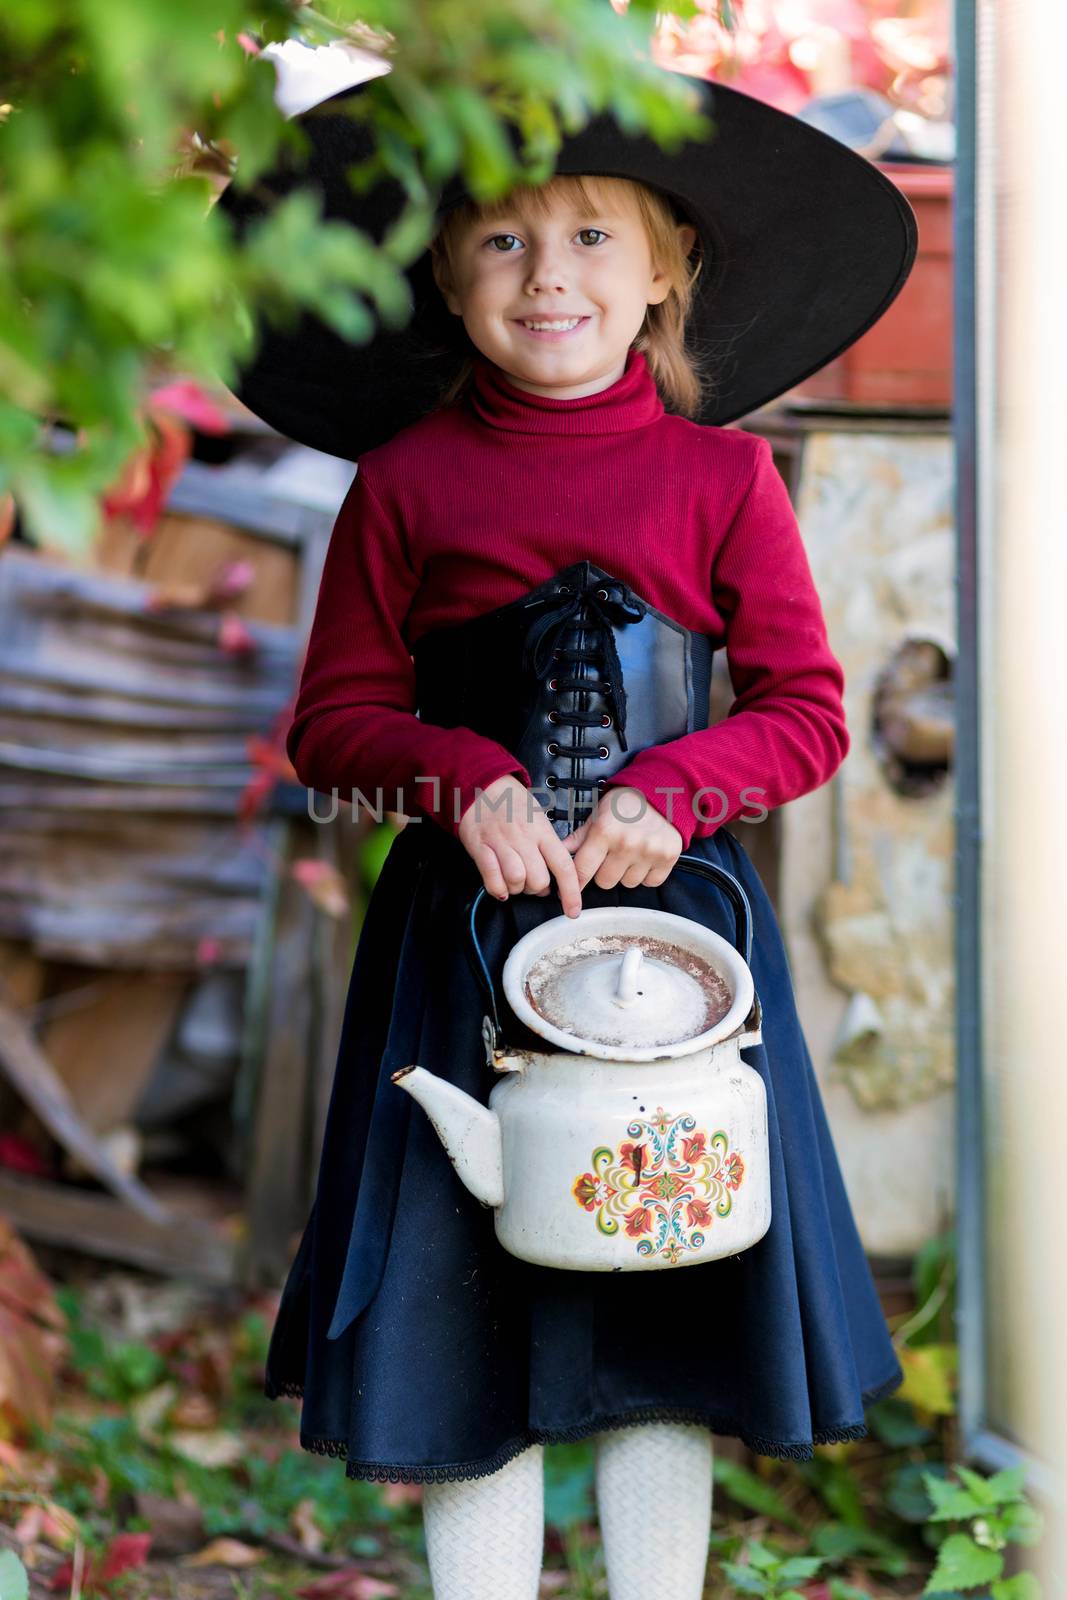 Little girl dressed as a witch holding a kettle on halloween party in the garden